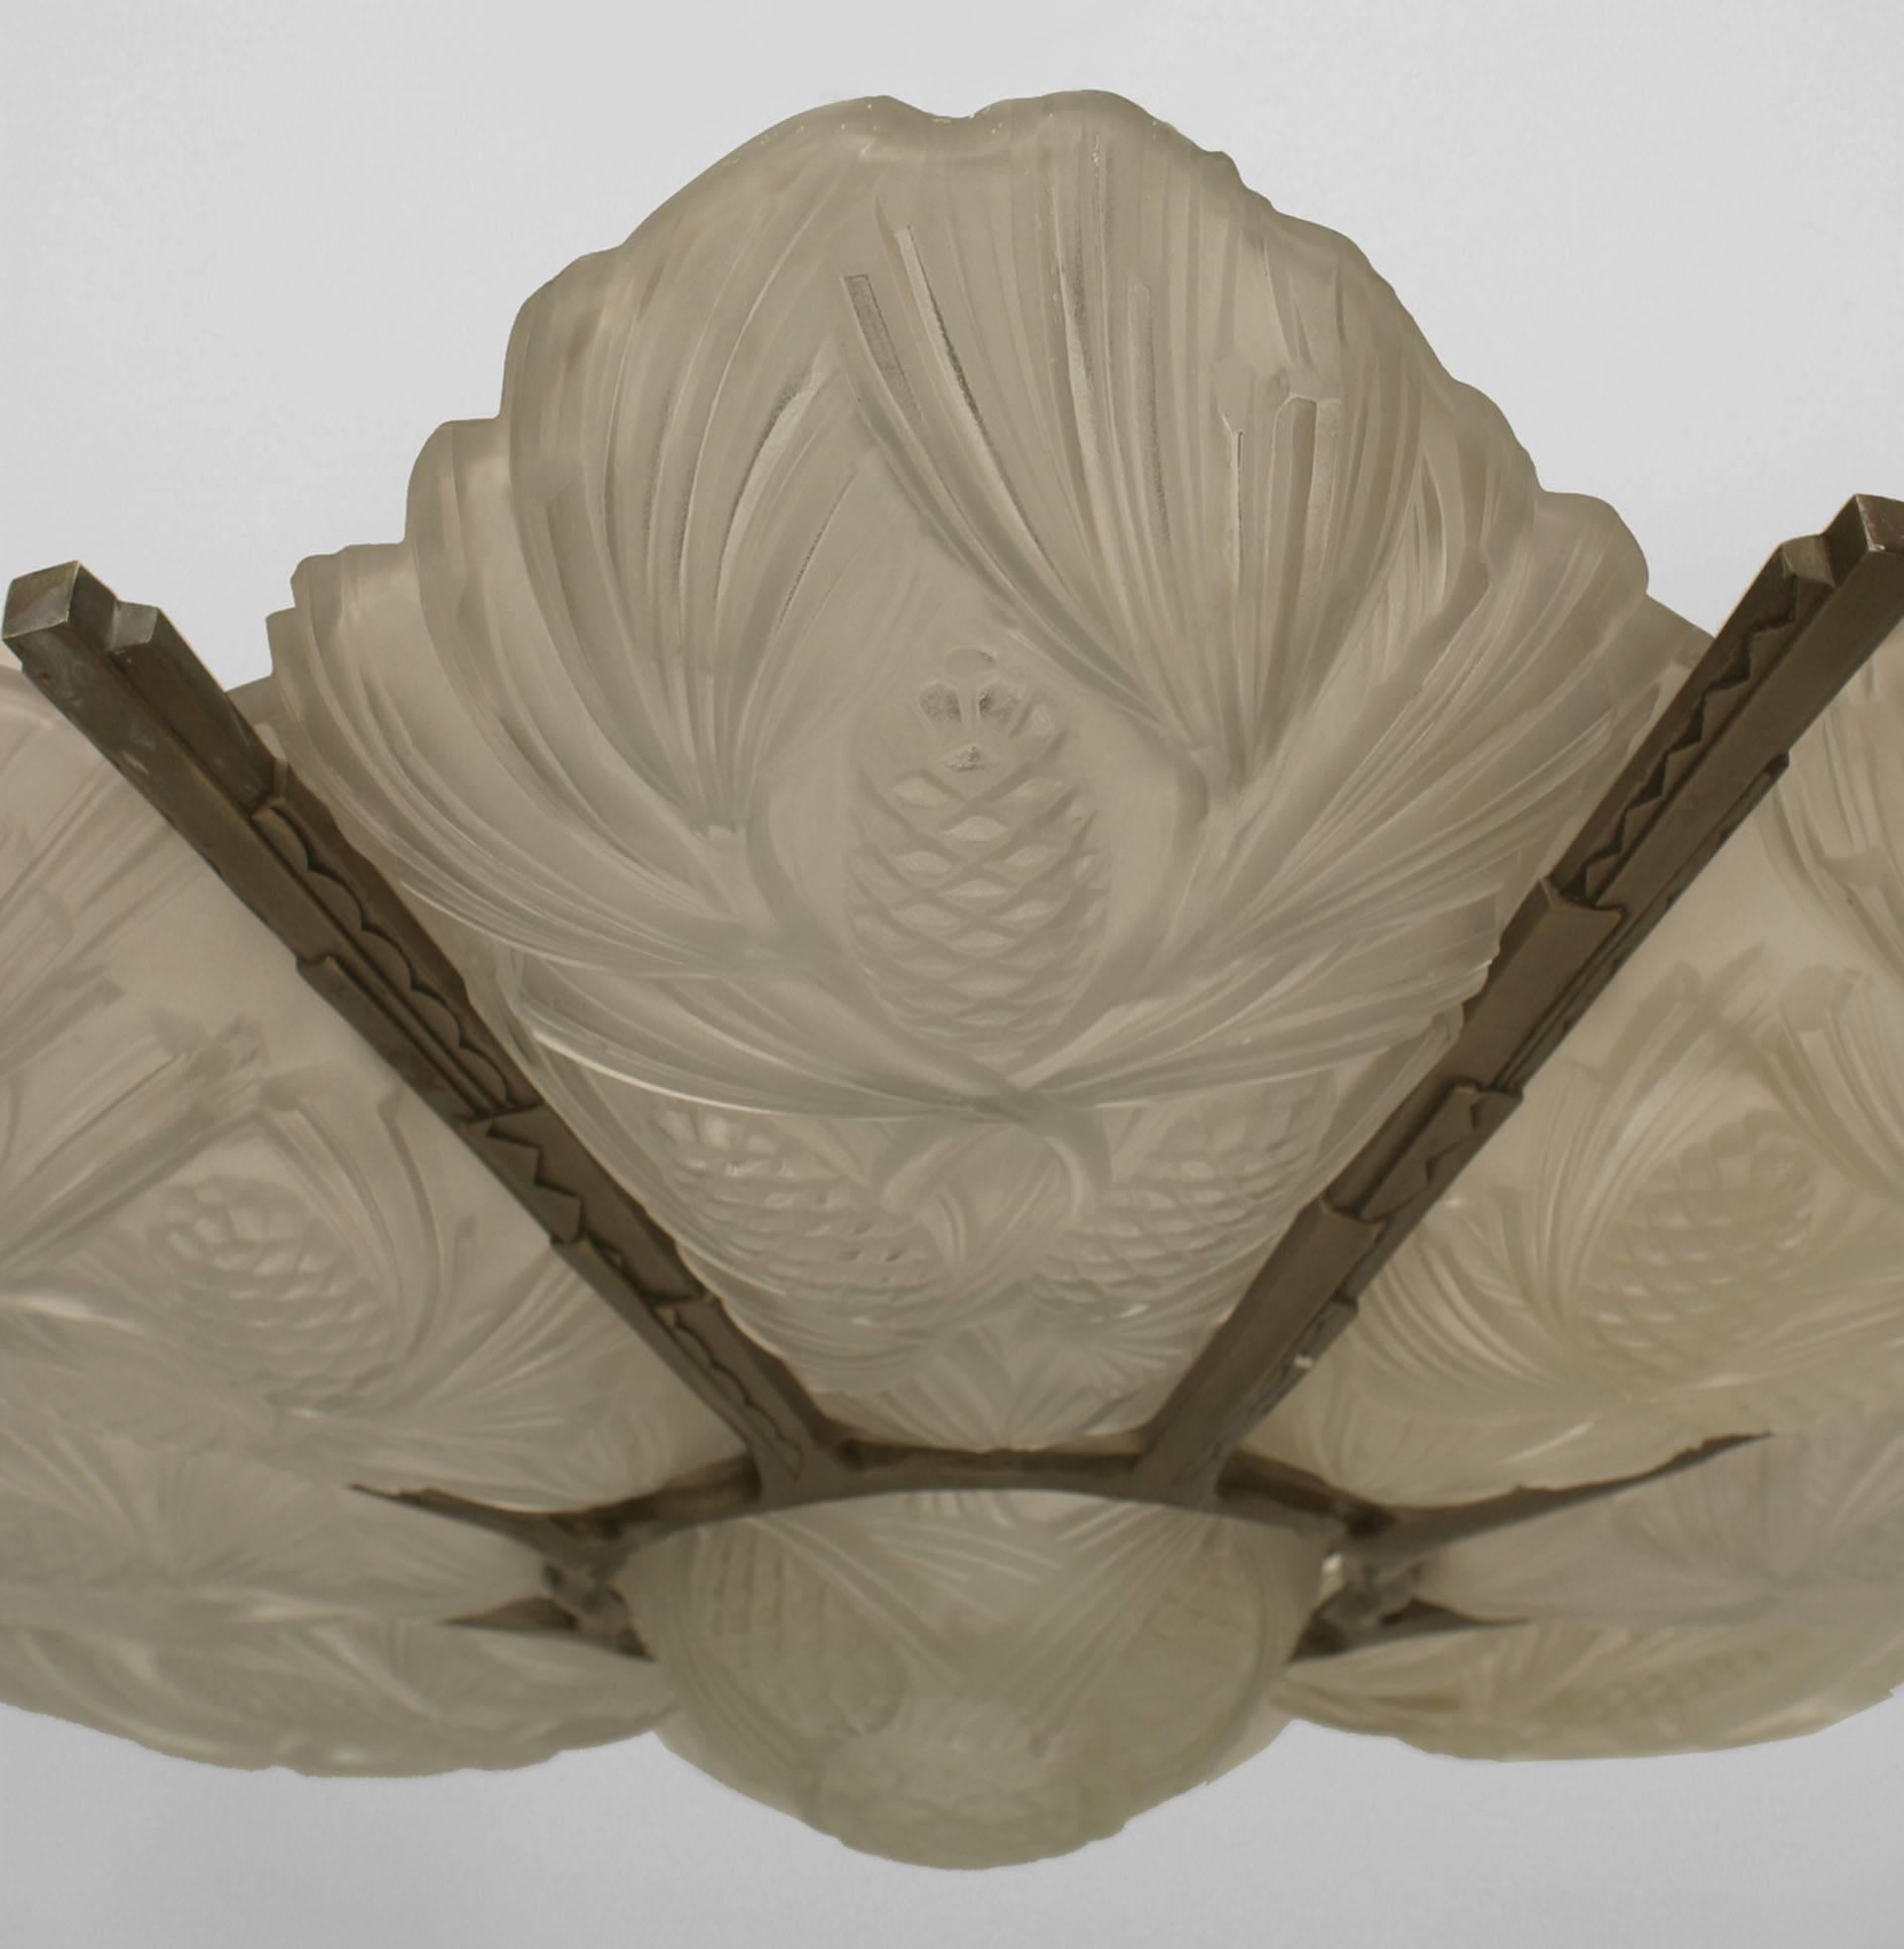 French Art Deco chandelier with 8 frosted floral design panels supported on a round metal frame with a center bottom shade (signed SABINO -ref: pg 219 AN & AD Lamps)
